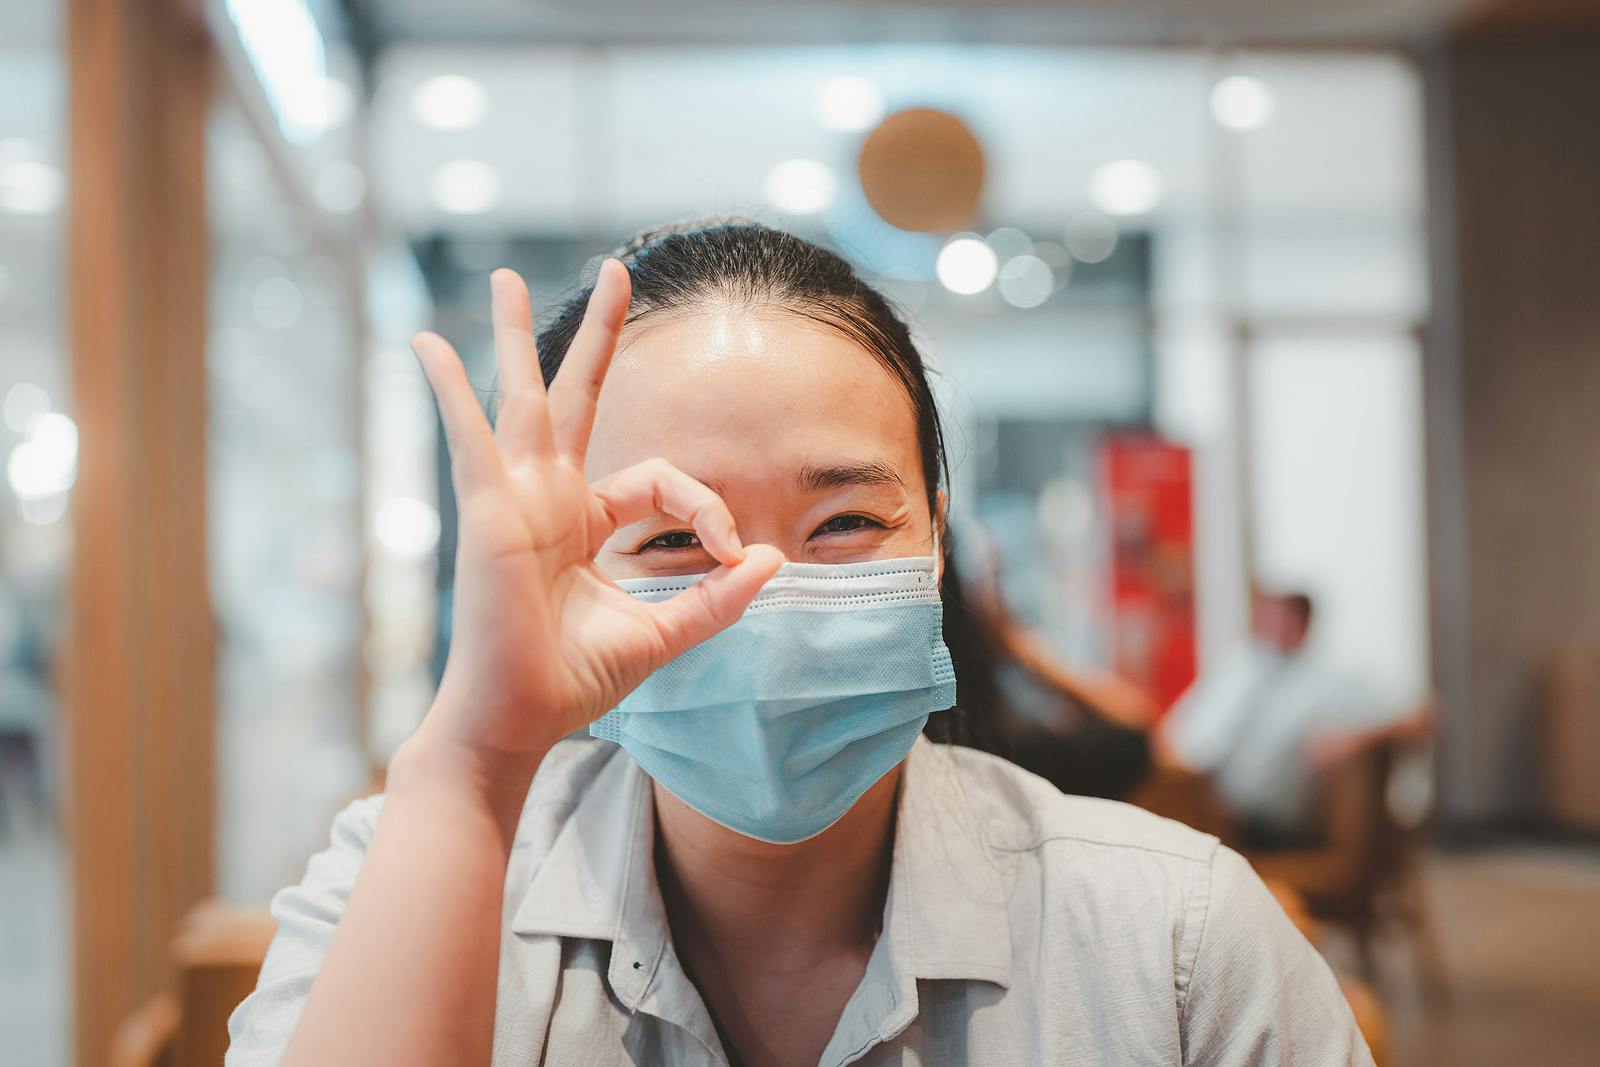 New normal of Asian lady wearing surgical face mask showing fine in sign language hand and smiling at camera Ways of life after the coronavirus COVID-19 outbreak , protect yourself in public places.
